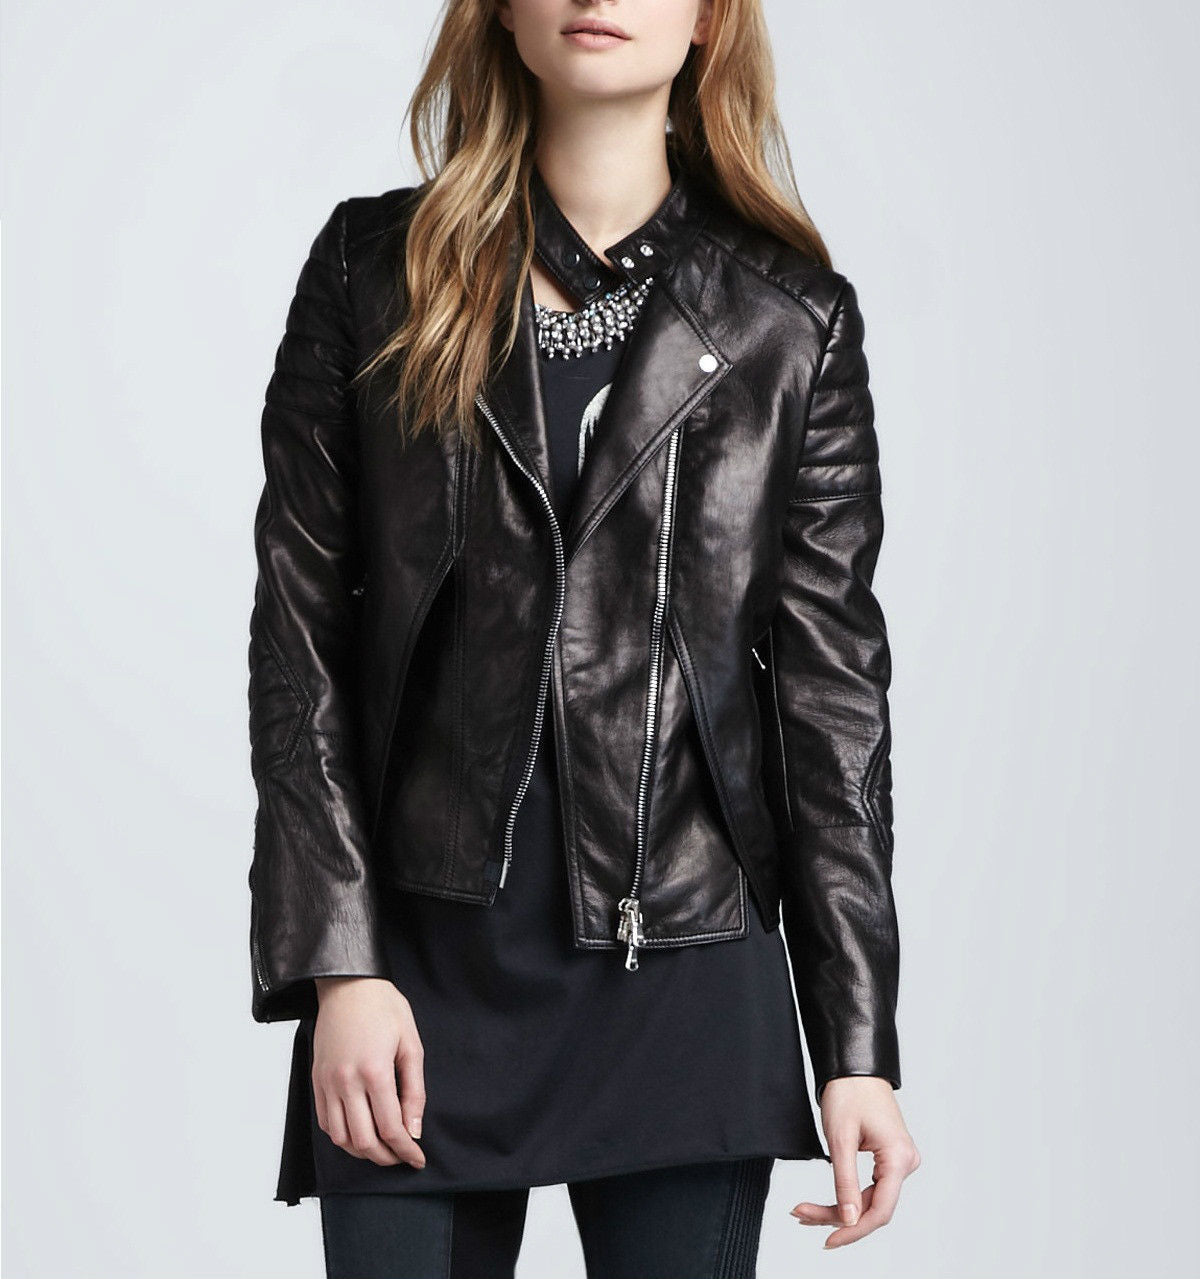 Noora Women's Edgy Motorcycle leather jacket ST0202